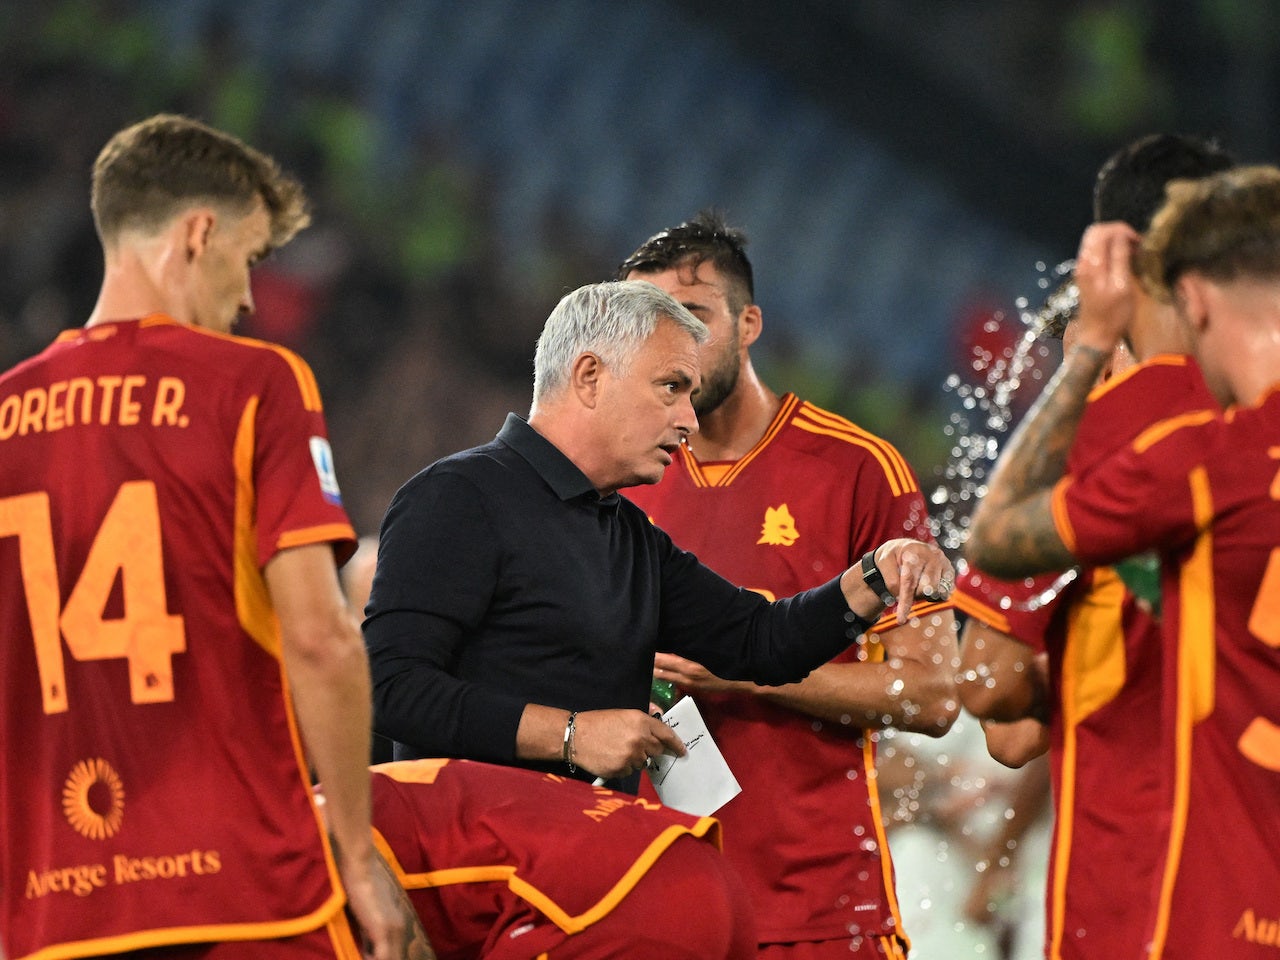 Europa League: Roma's first game away at Sheriff - AS Roma